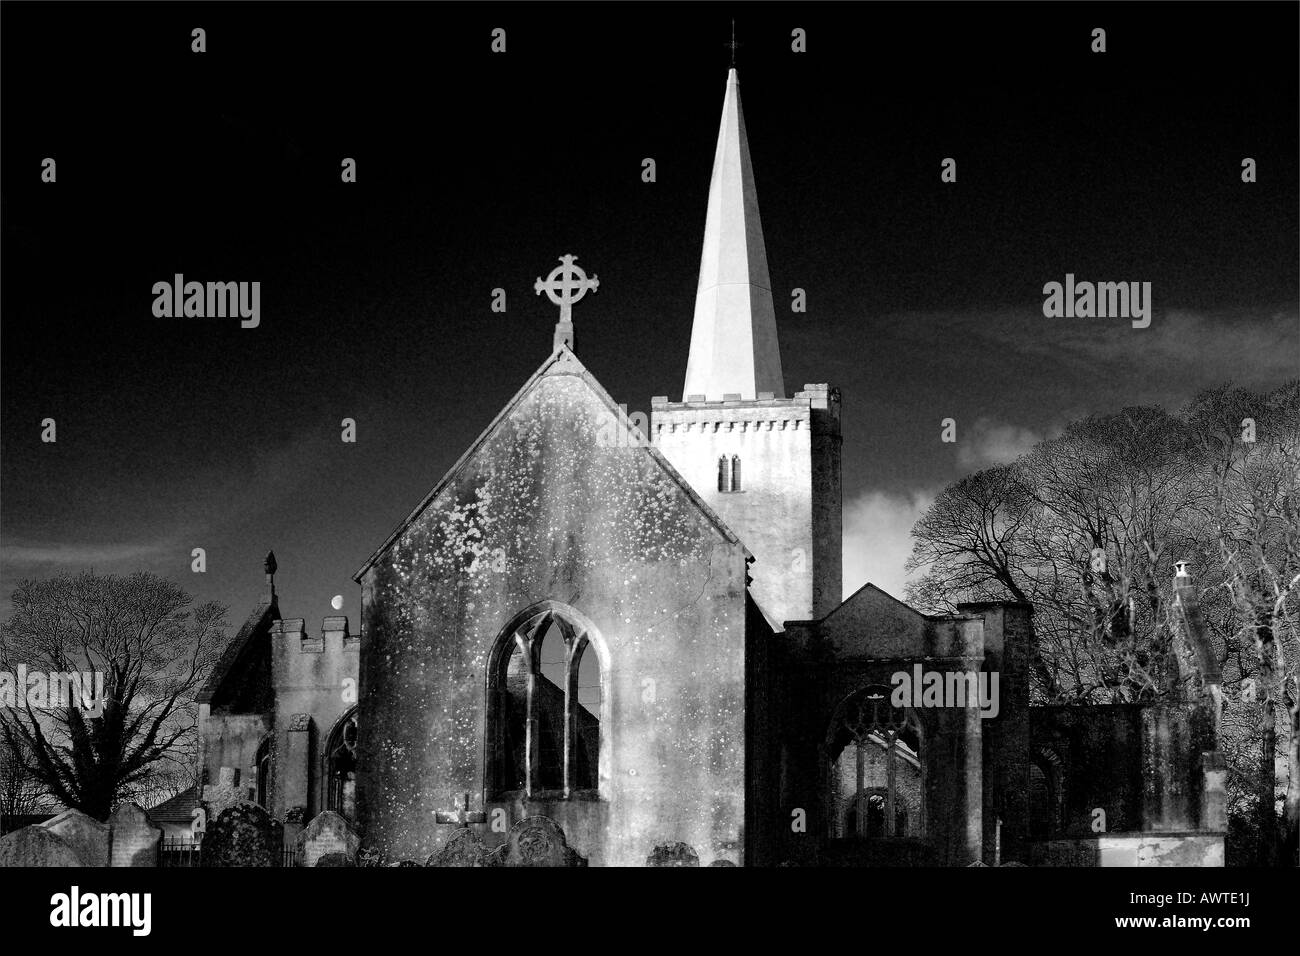 Atmospheric Infrared Style monochrome image of a graveyard and derelict church with galssless windows and no roof Stock Photo